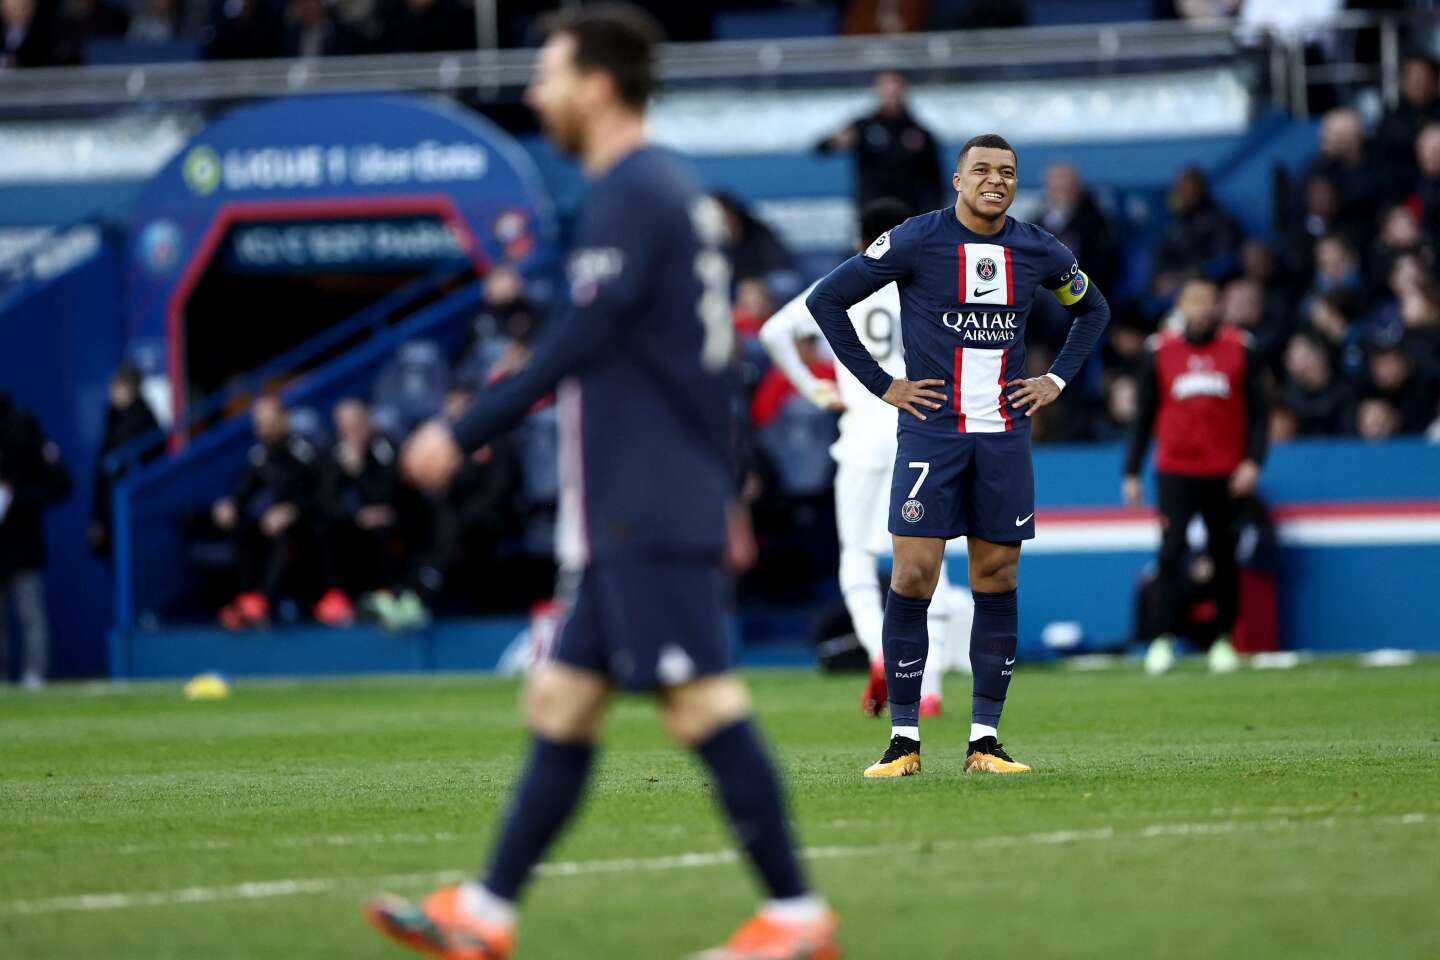 PSG fall at home against Rennes